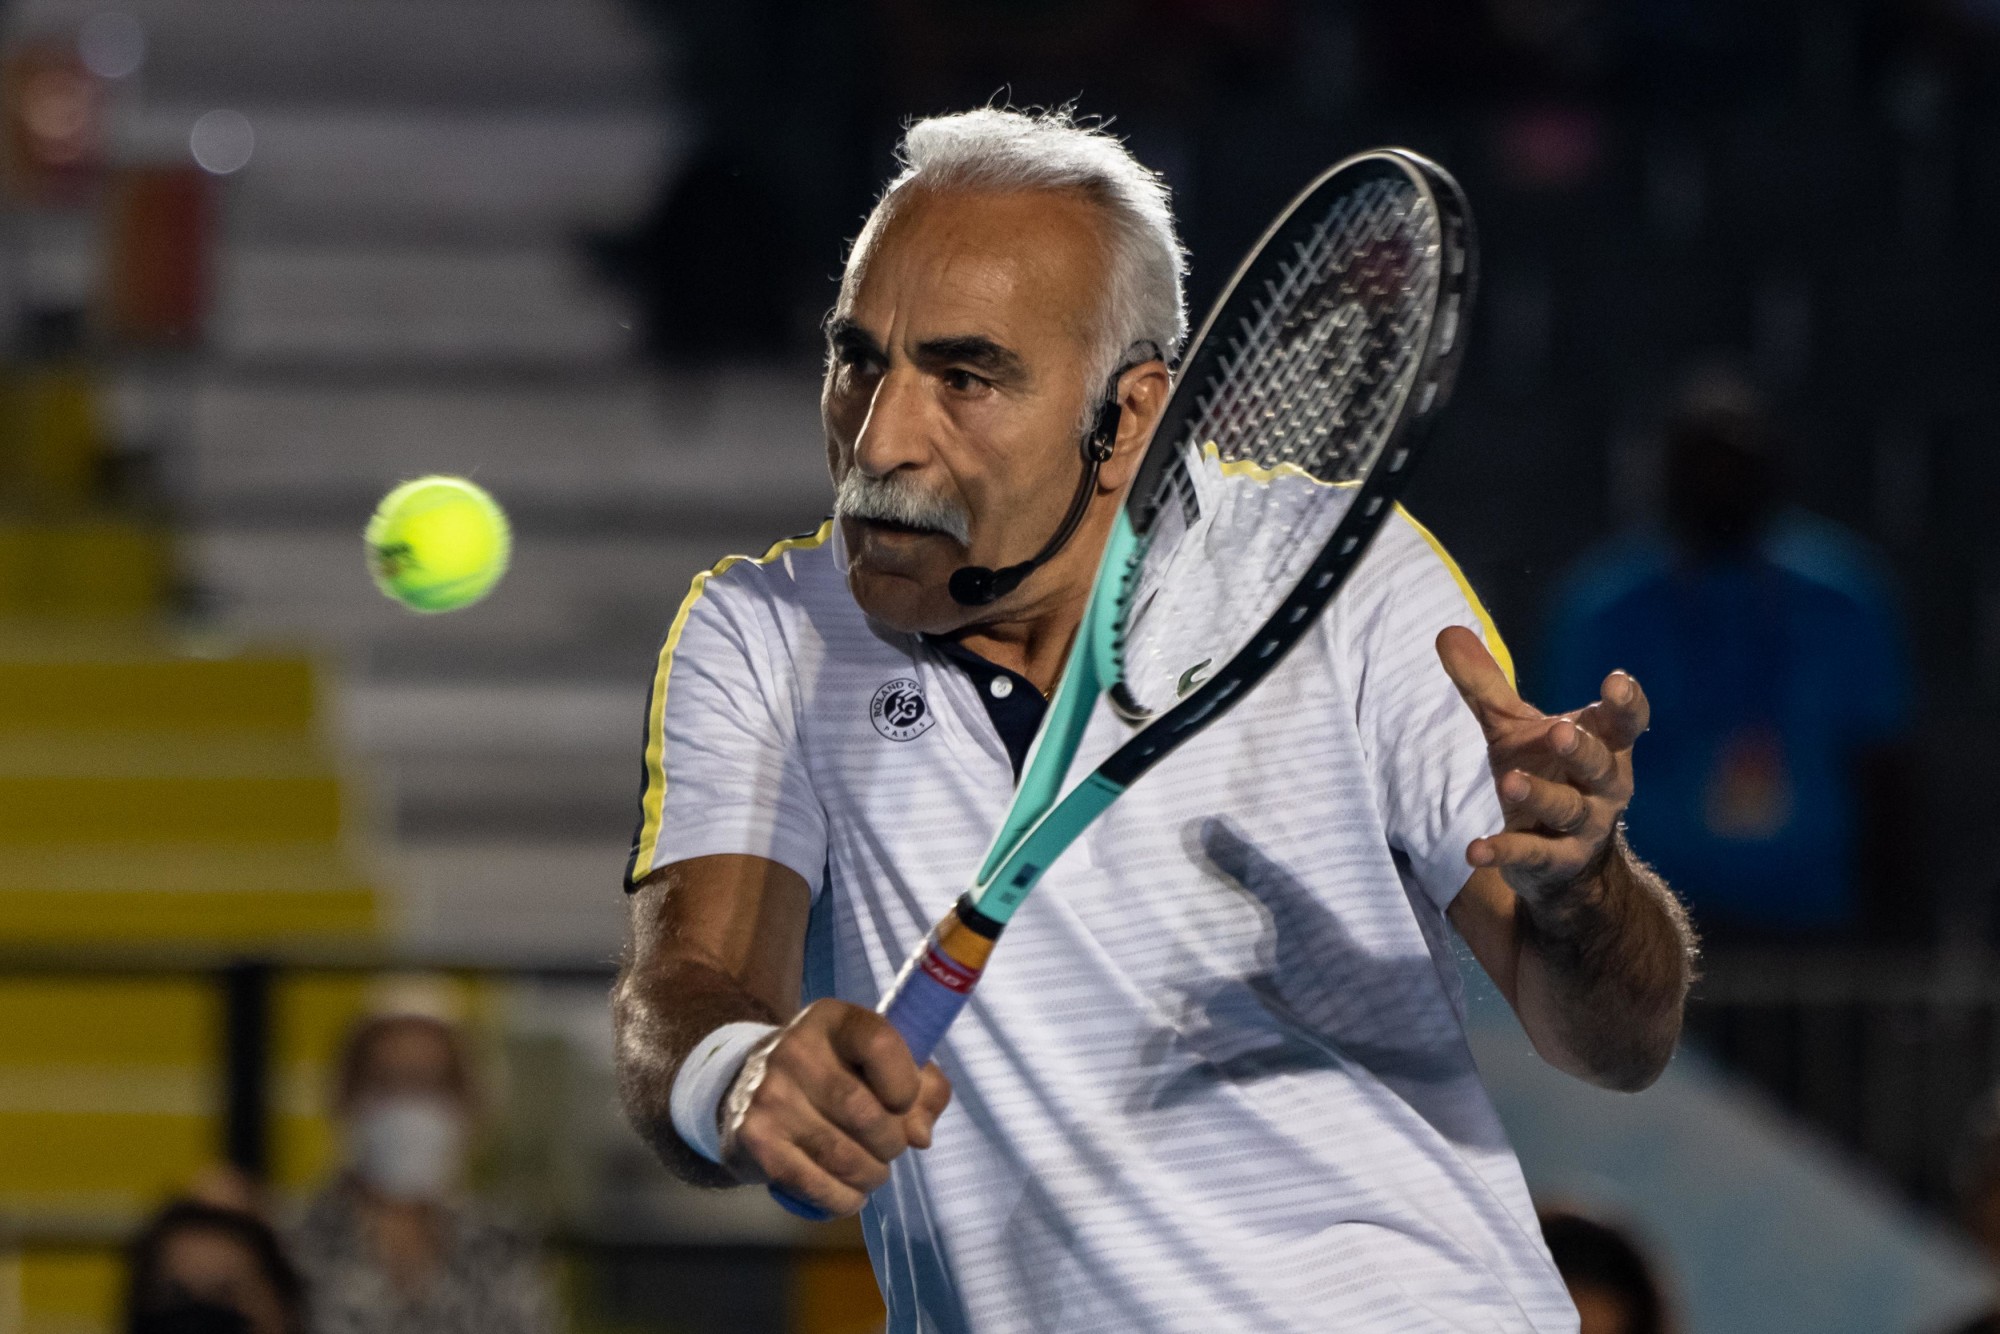 Tennis Player Mansour Bahrami in the Men-s Exhibition Match against Fabrice Santoro during World Tennis week at the Expo Sports Arena m52822